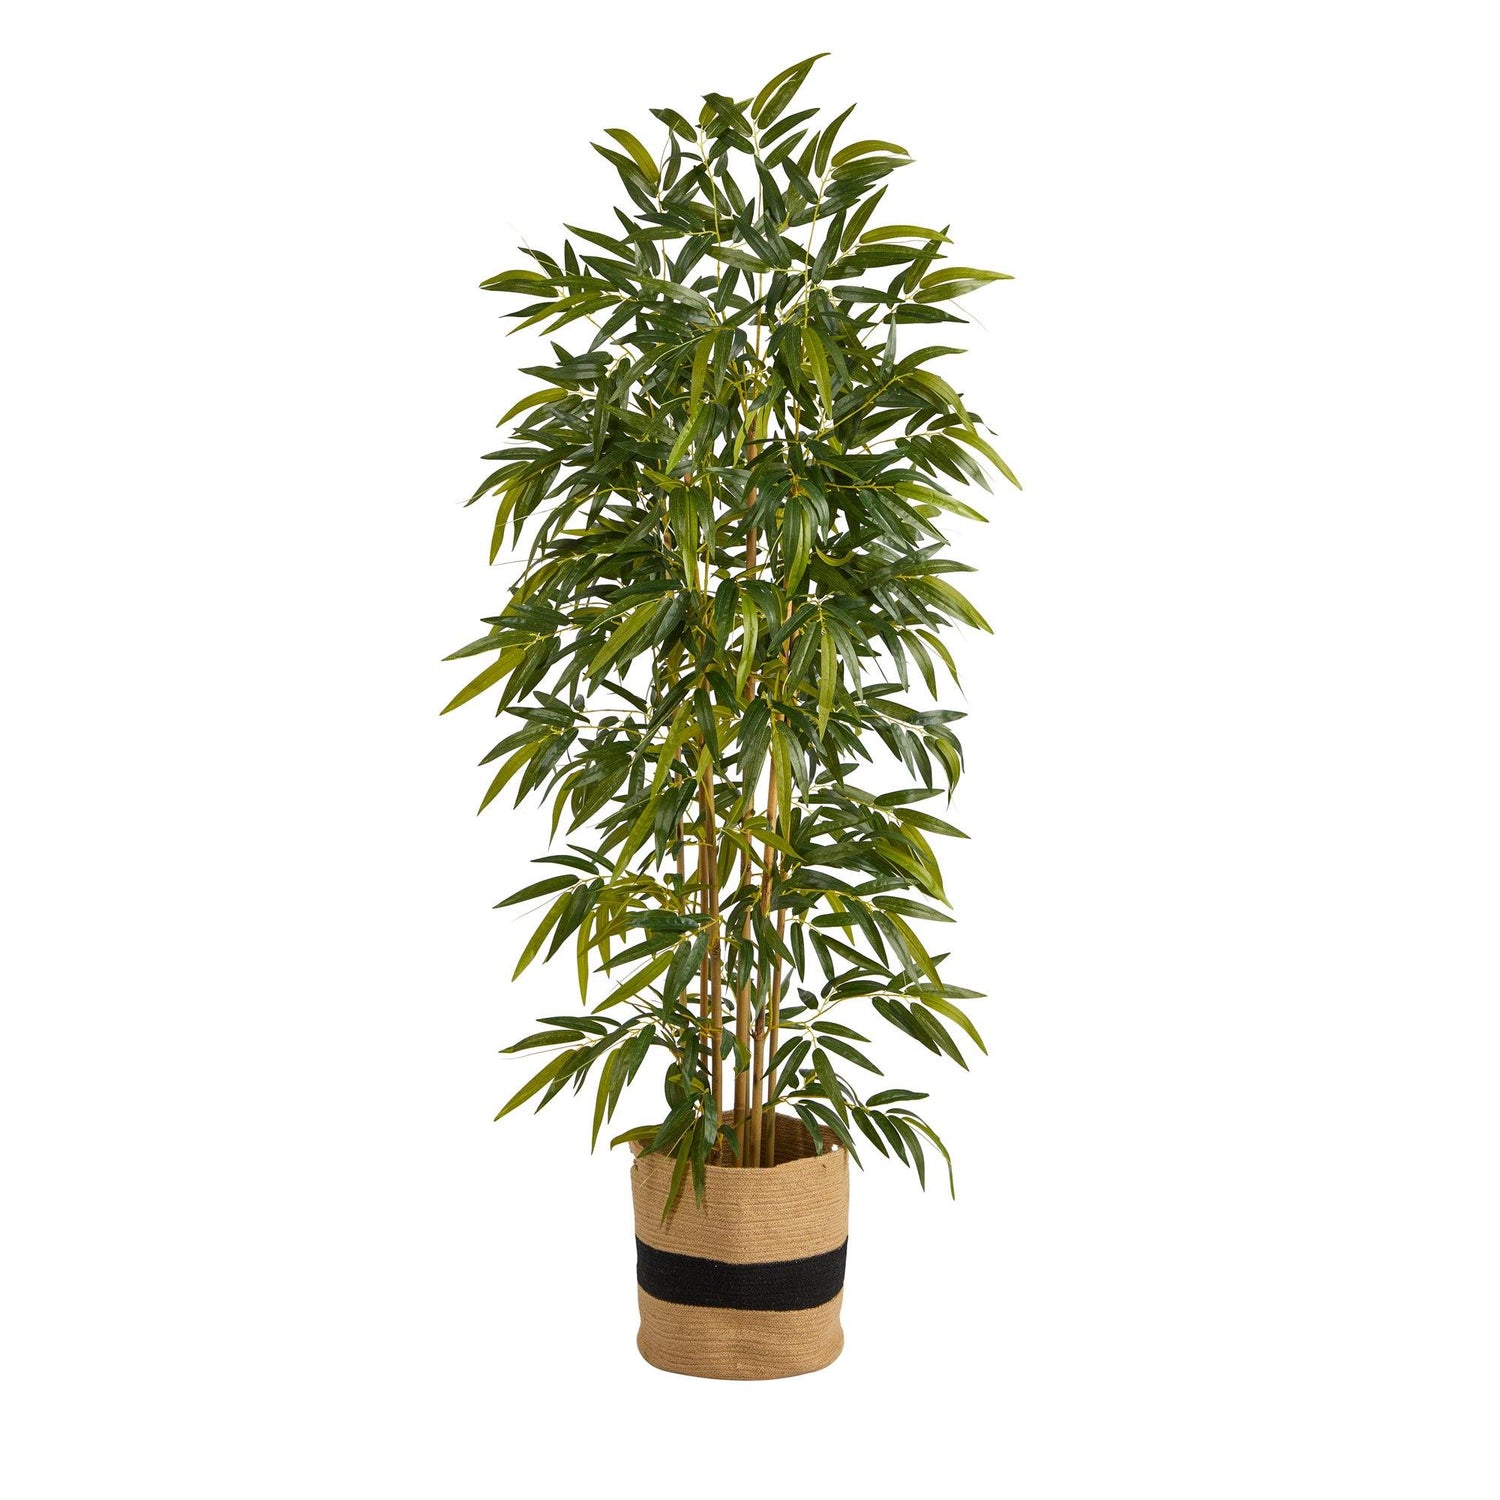 75” Bamboo Artificial Tree in Handmade Natural Cotton Planter